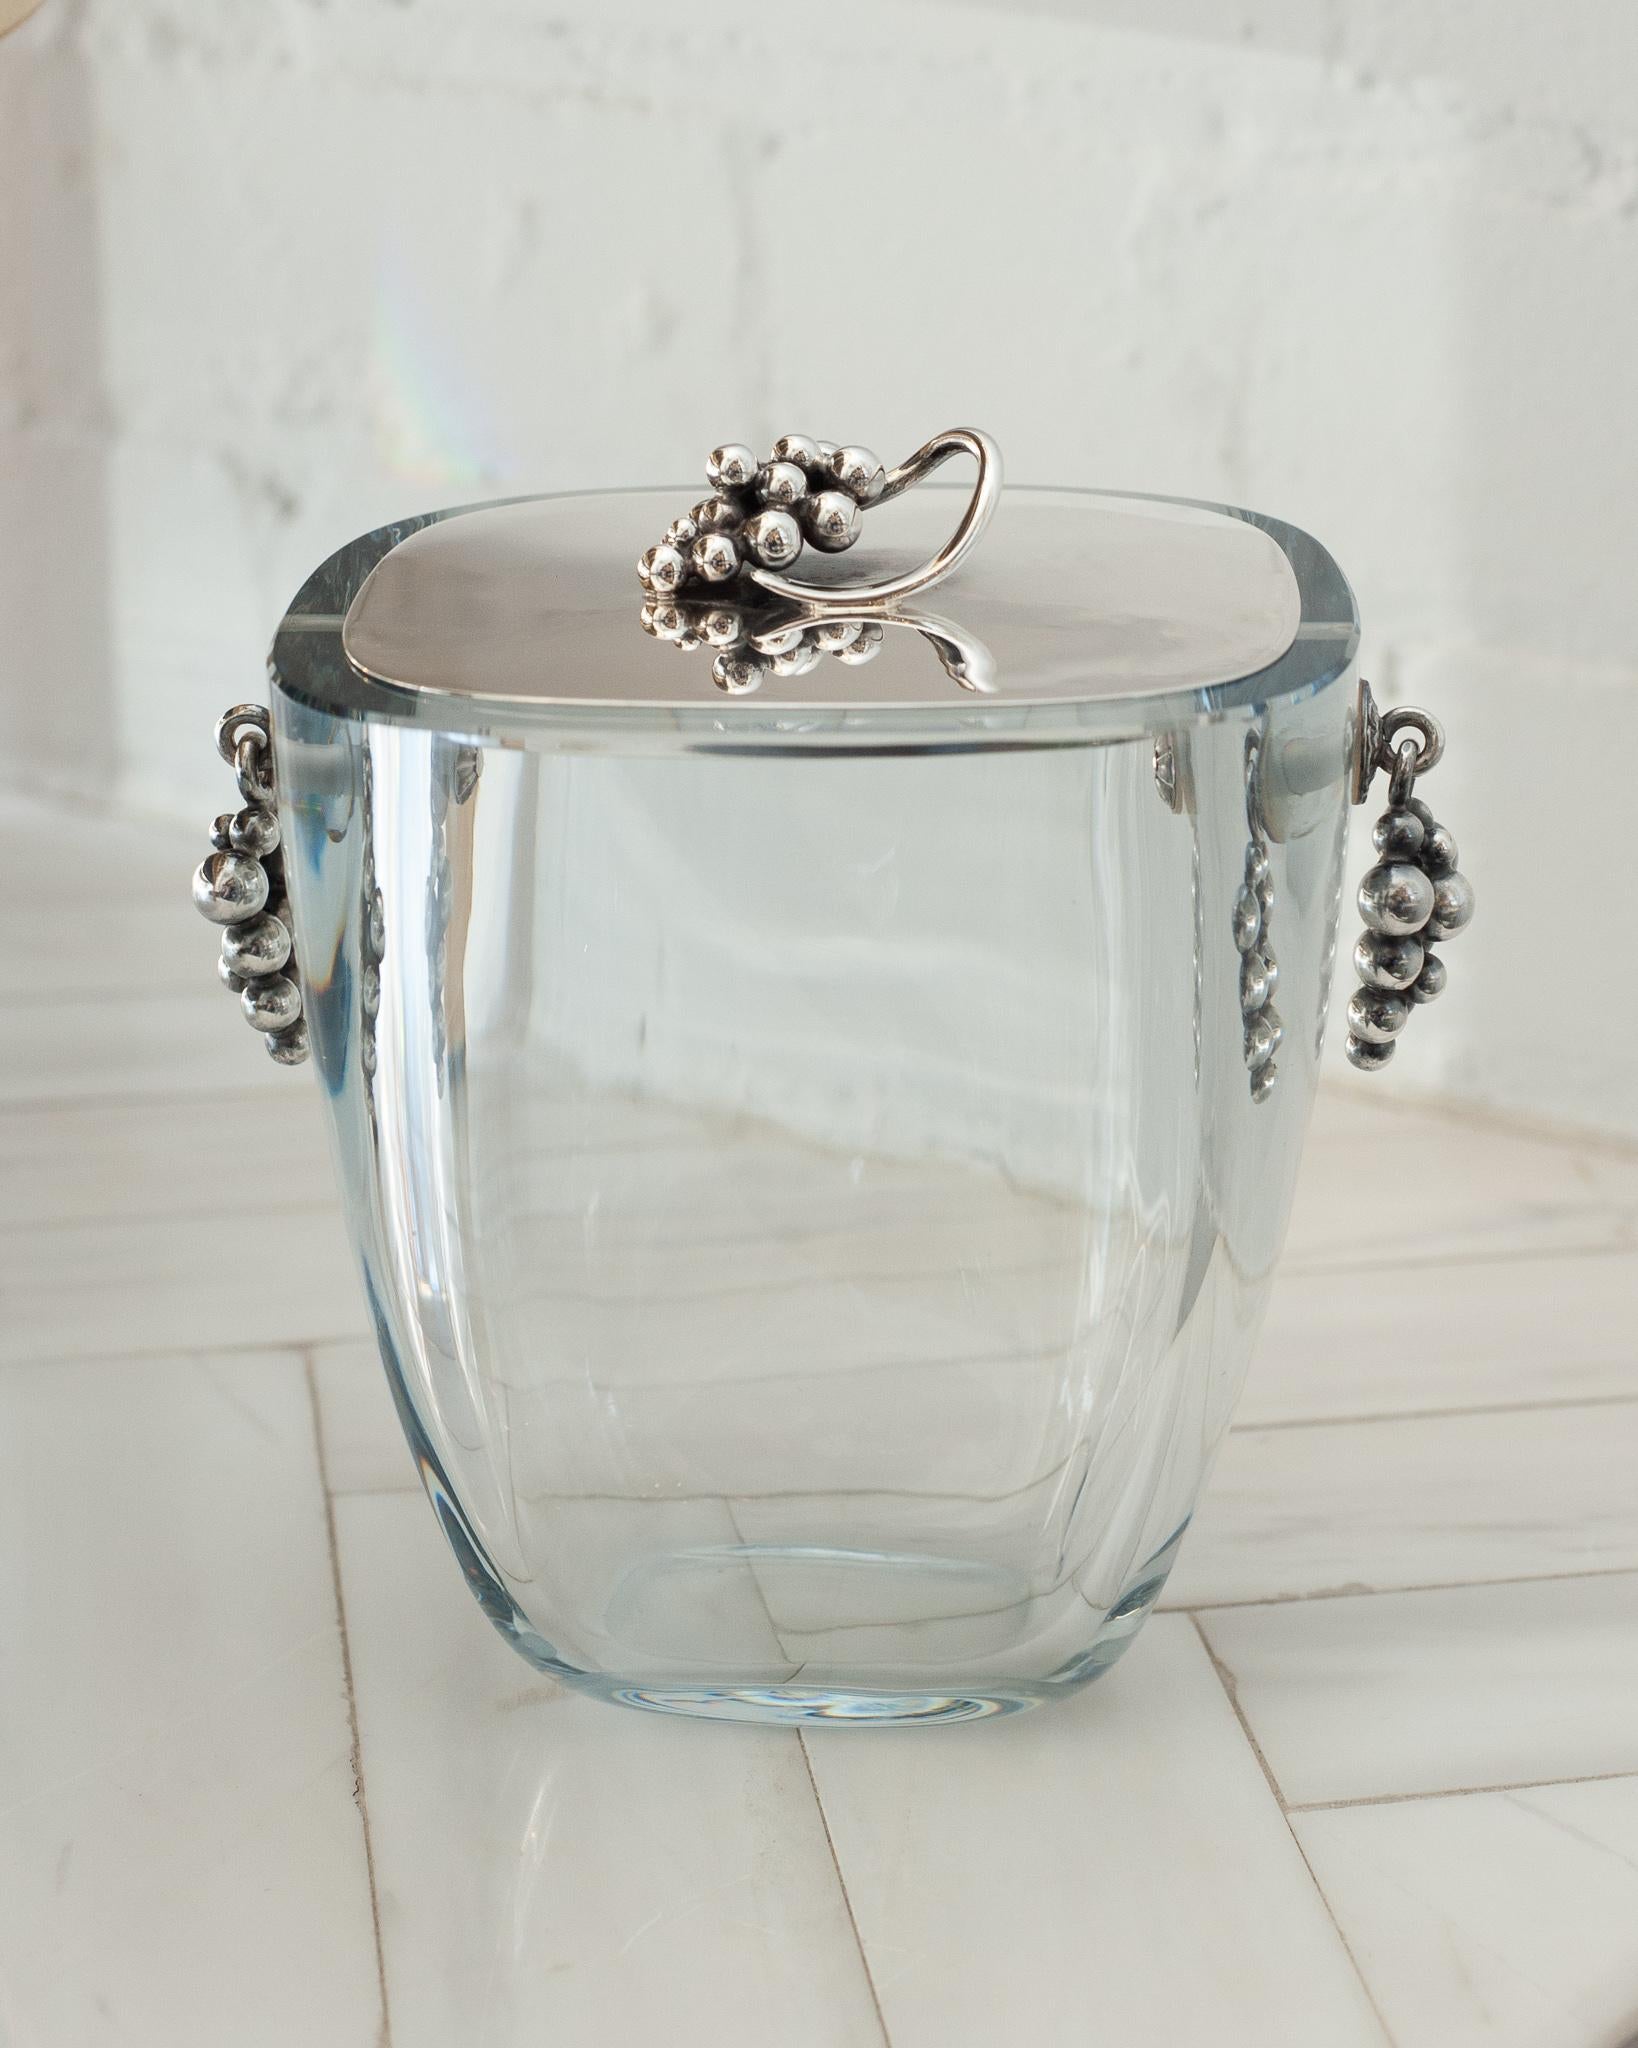 A beautiful mid century ice bucket made by E. Dragsted in Denmark. It features a thickly cut oval clear bucket, with sterling silver grape bunches mounted to each side. Flat sterling silver cover with grape bunch finial. Cover marked with makers